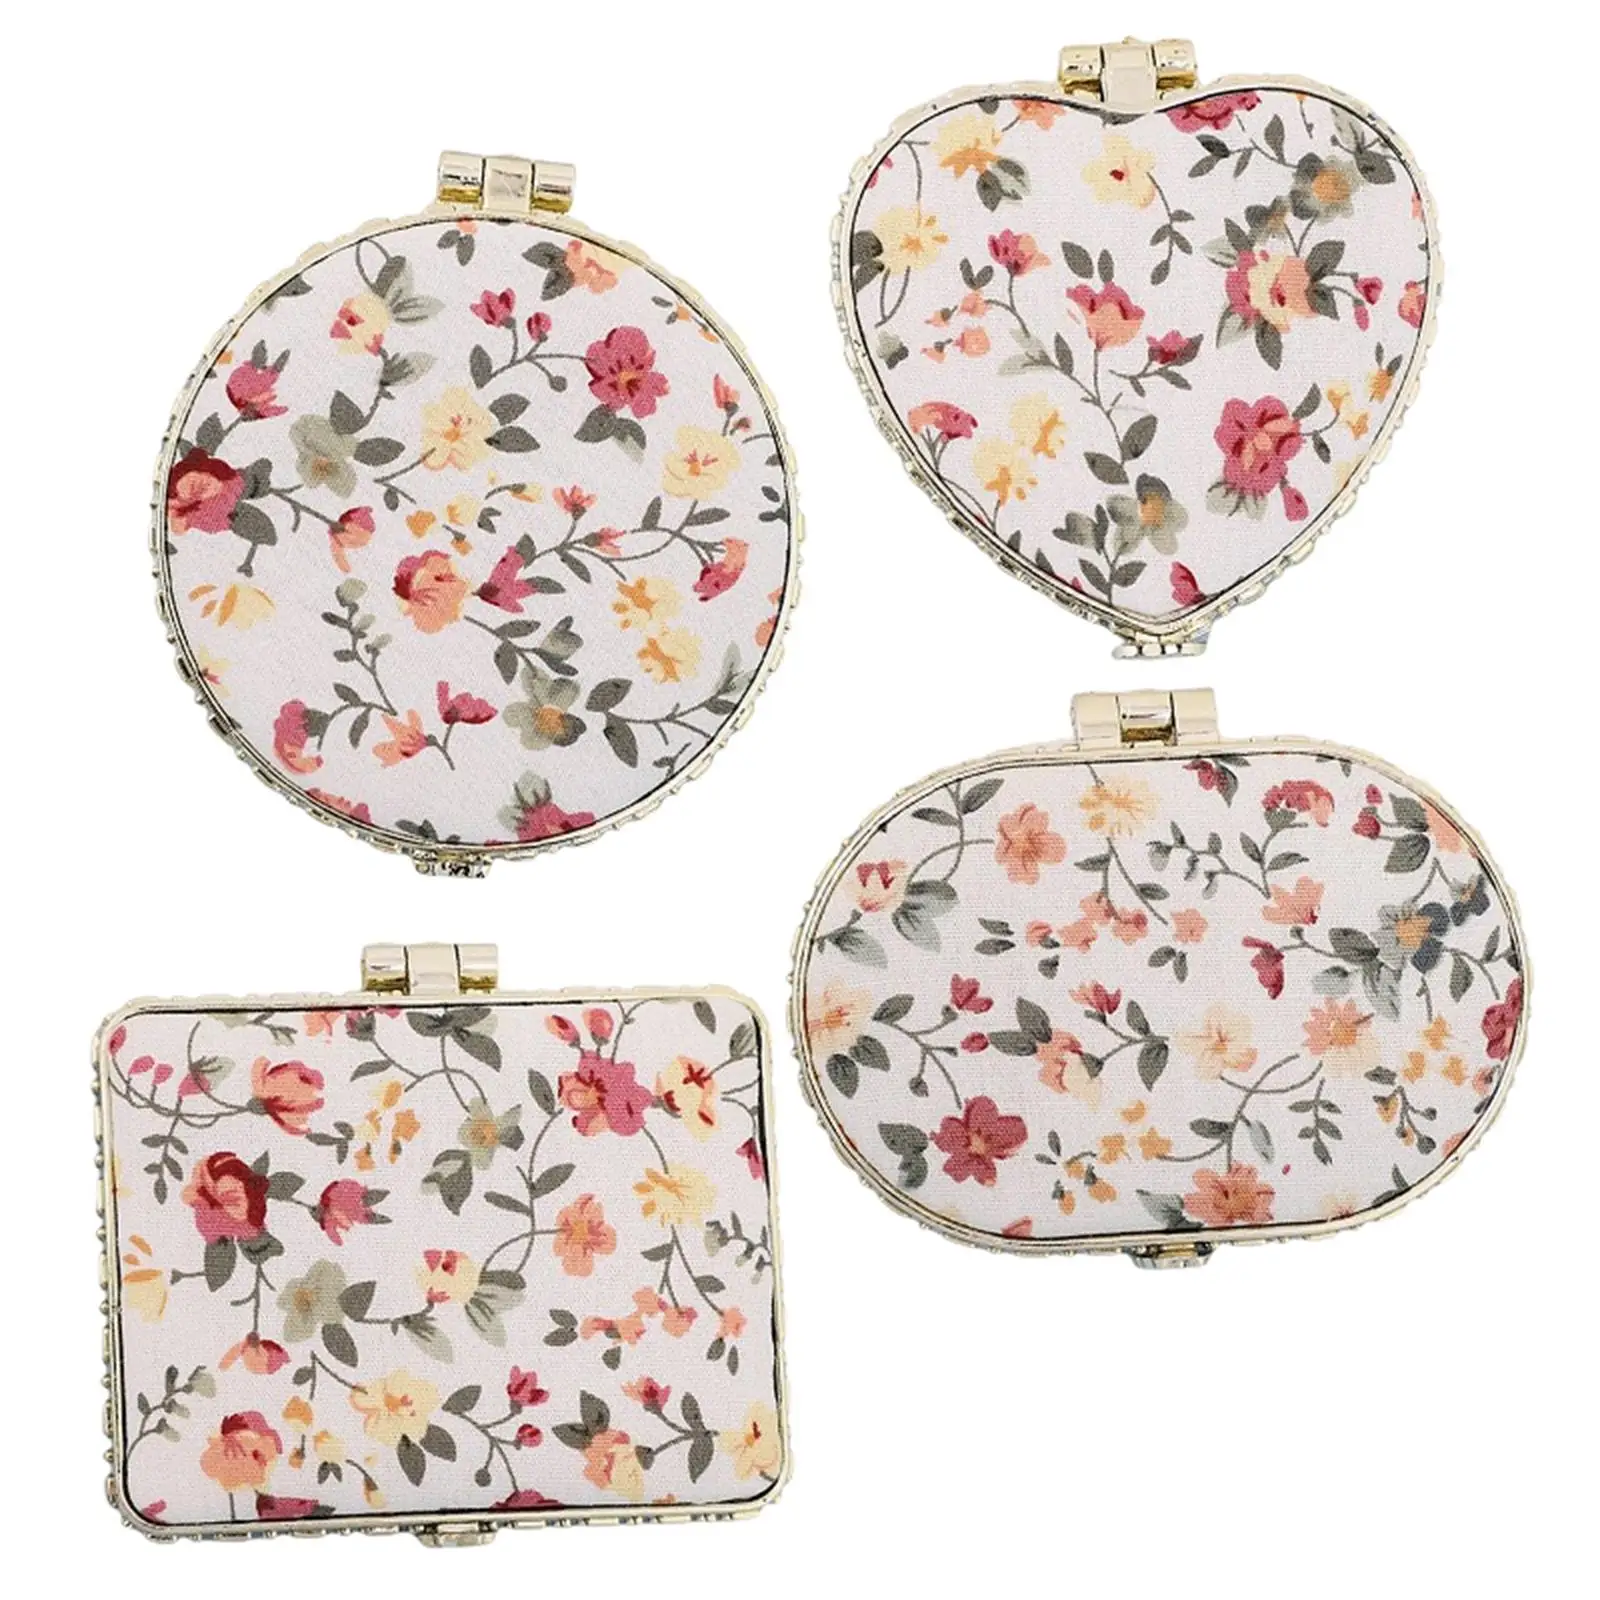 Portable Travel Makeup Mirror Folding Mirror 2 Sided Floral Printed Cosmetic Mirror for Purse Travel Home Office Girls Women